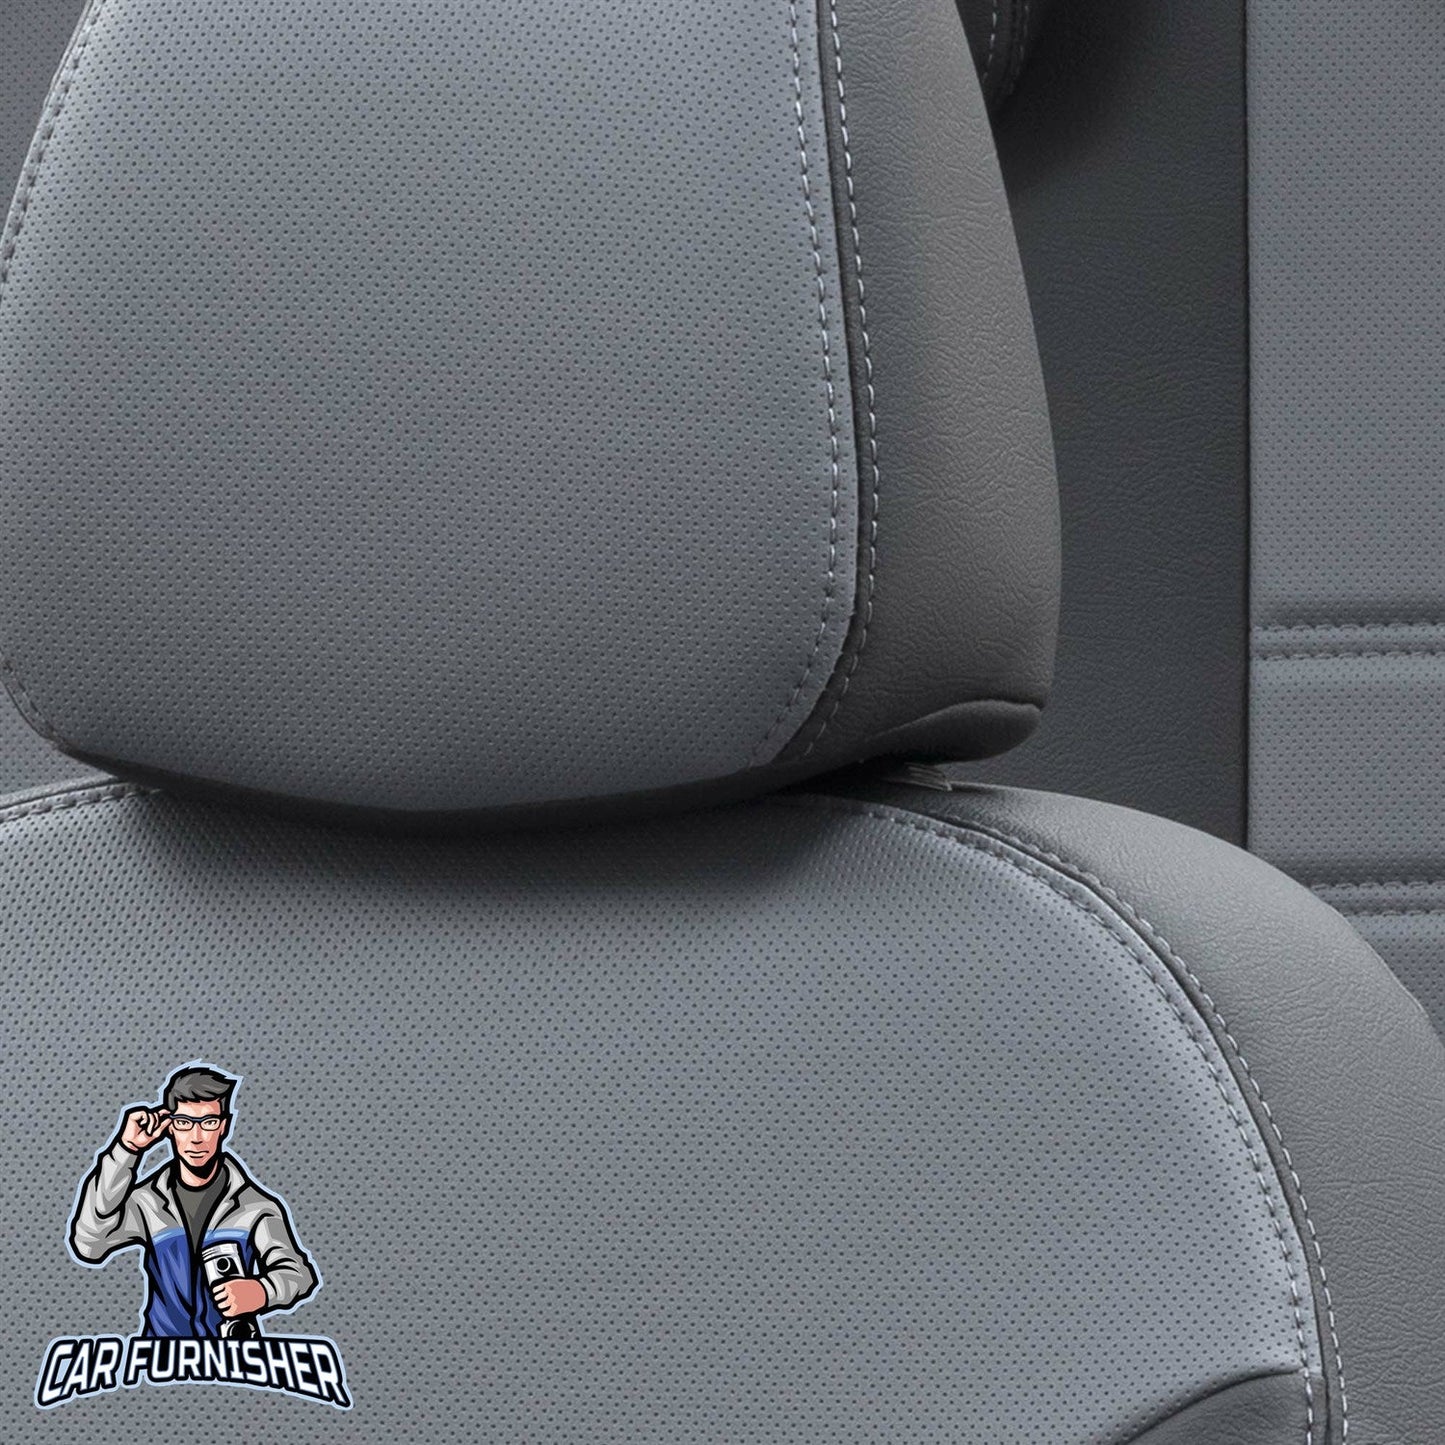 Volkswagen CC Seat Cover Istanbul Leather Design Smoked Black Leather